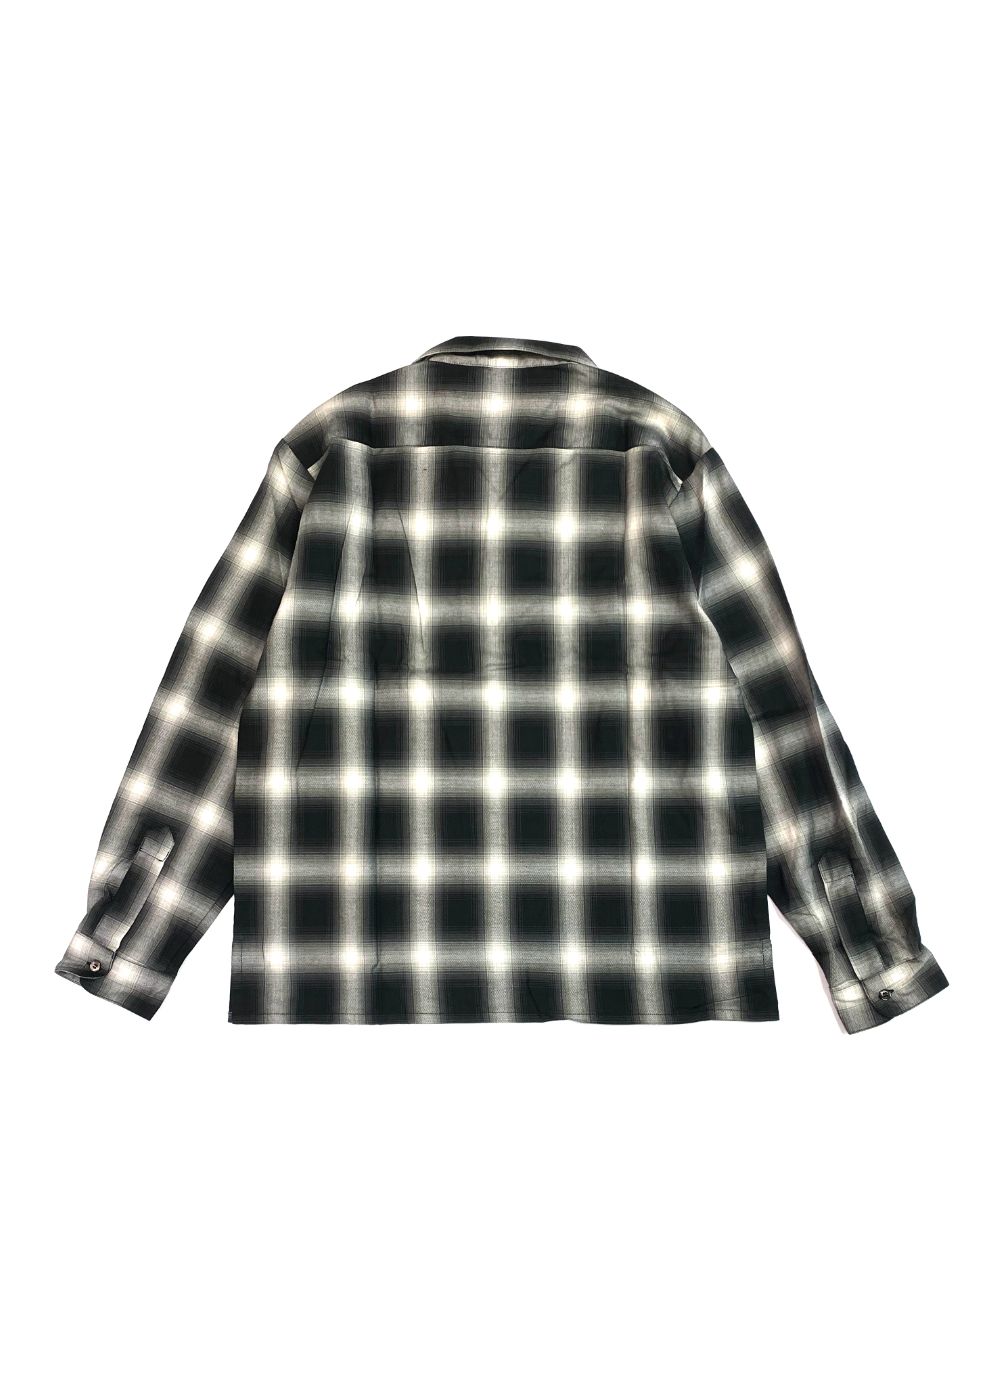 HIDE AND SEEK - 【ラスト1点】OMBRE CHECK L/S SHIRT 